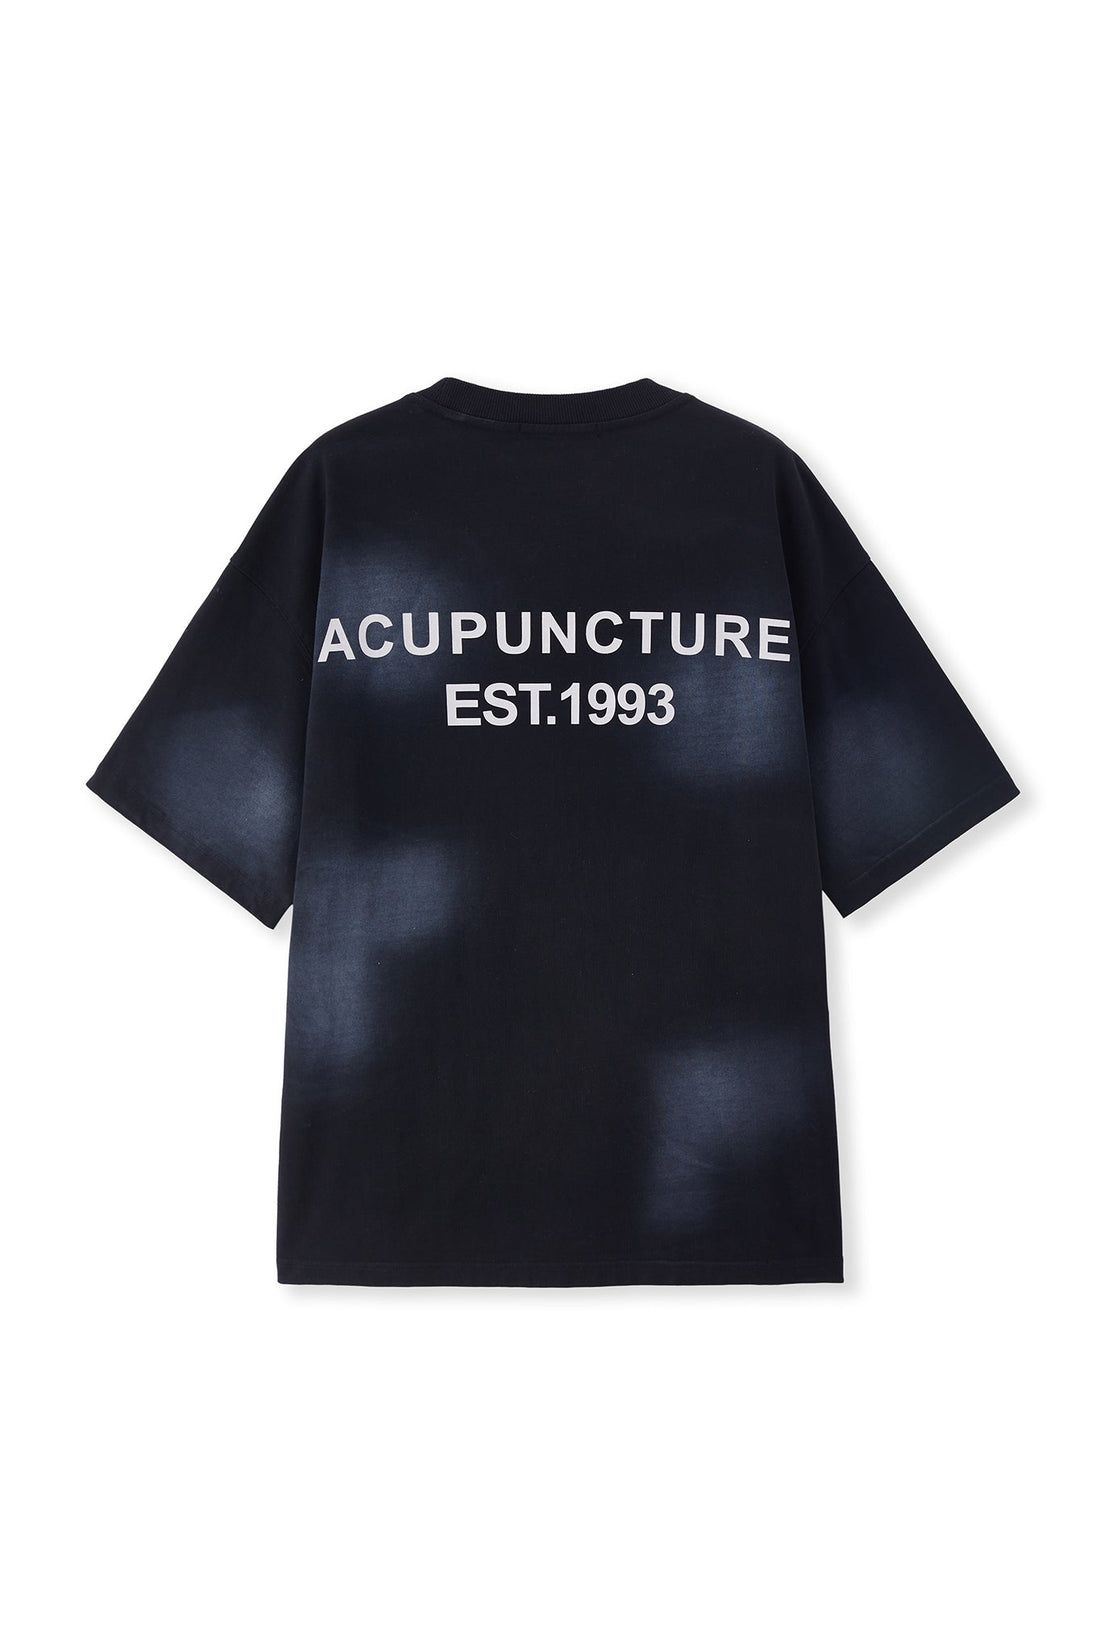 CLUELESS TSHIRT BLACK Acupuncture